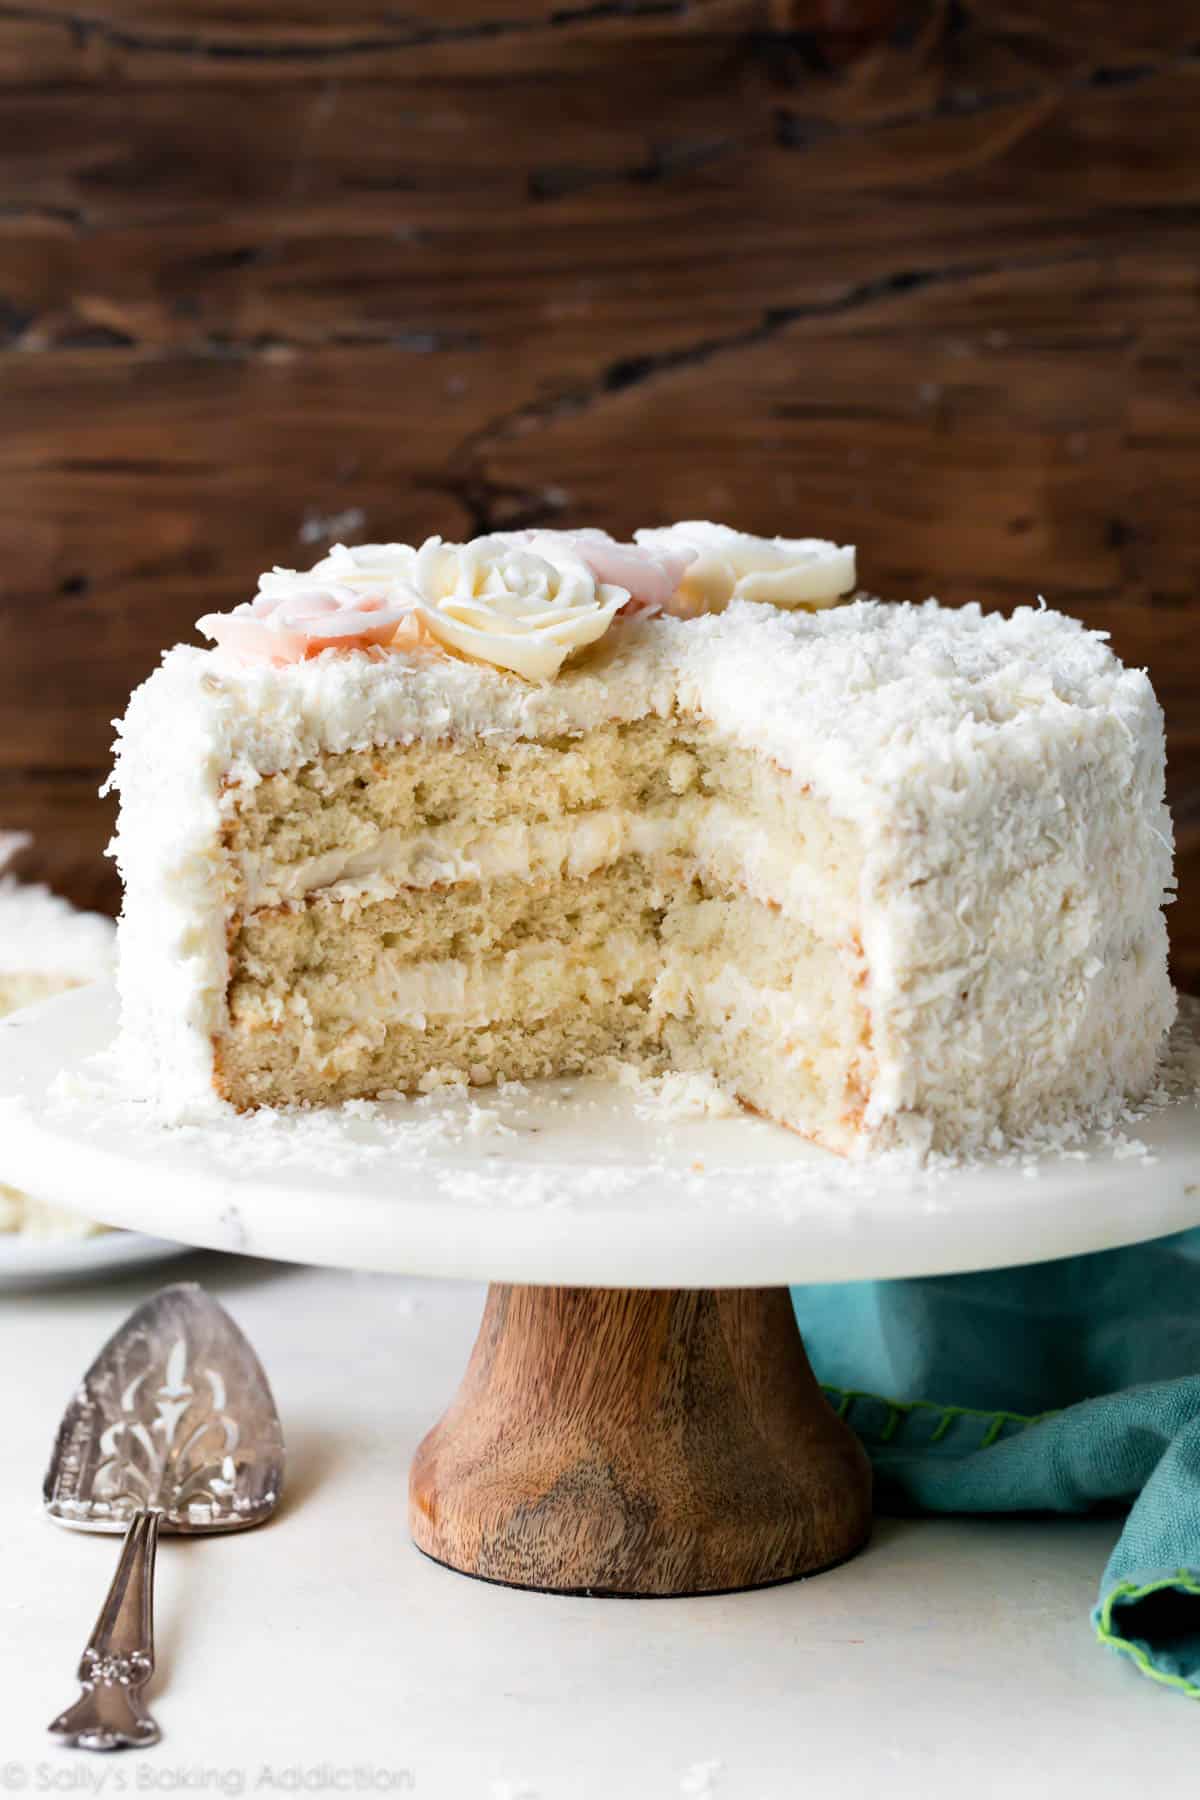 Sally’s Baking Addiction’s Coconut Cake with slices cut out